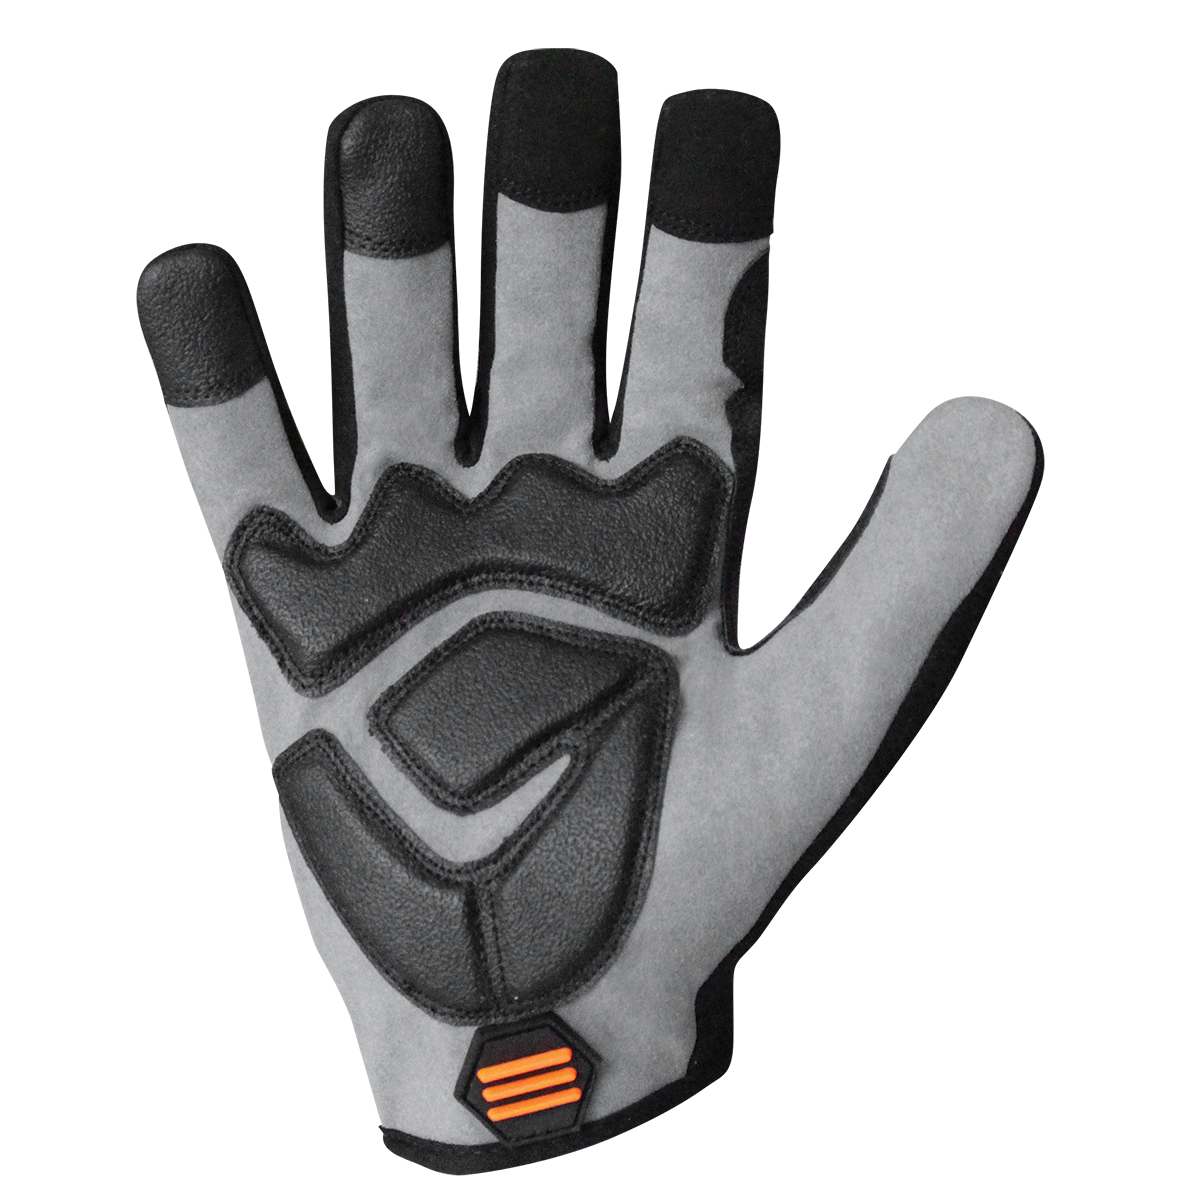 Armour Safety Products Ltd. - Duty Utility Enforcer Glove